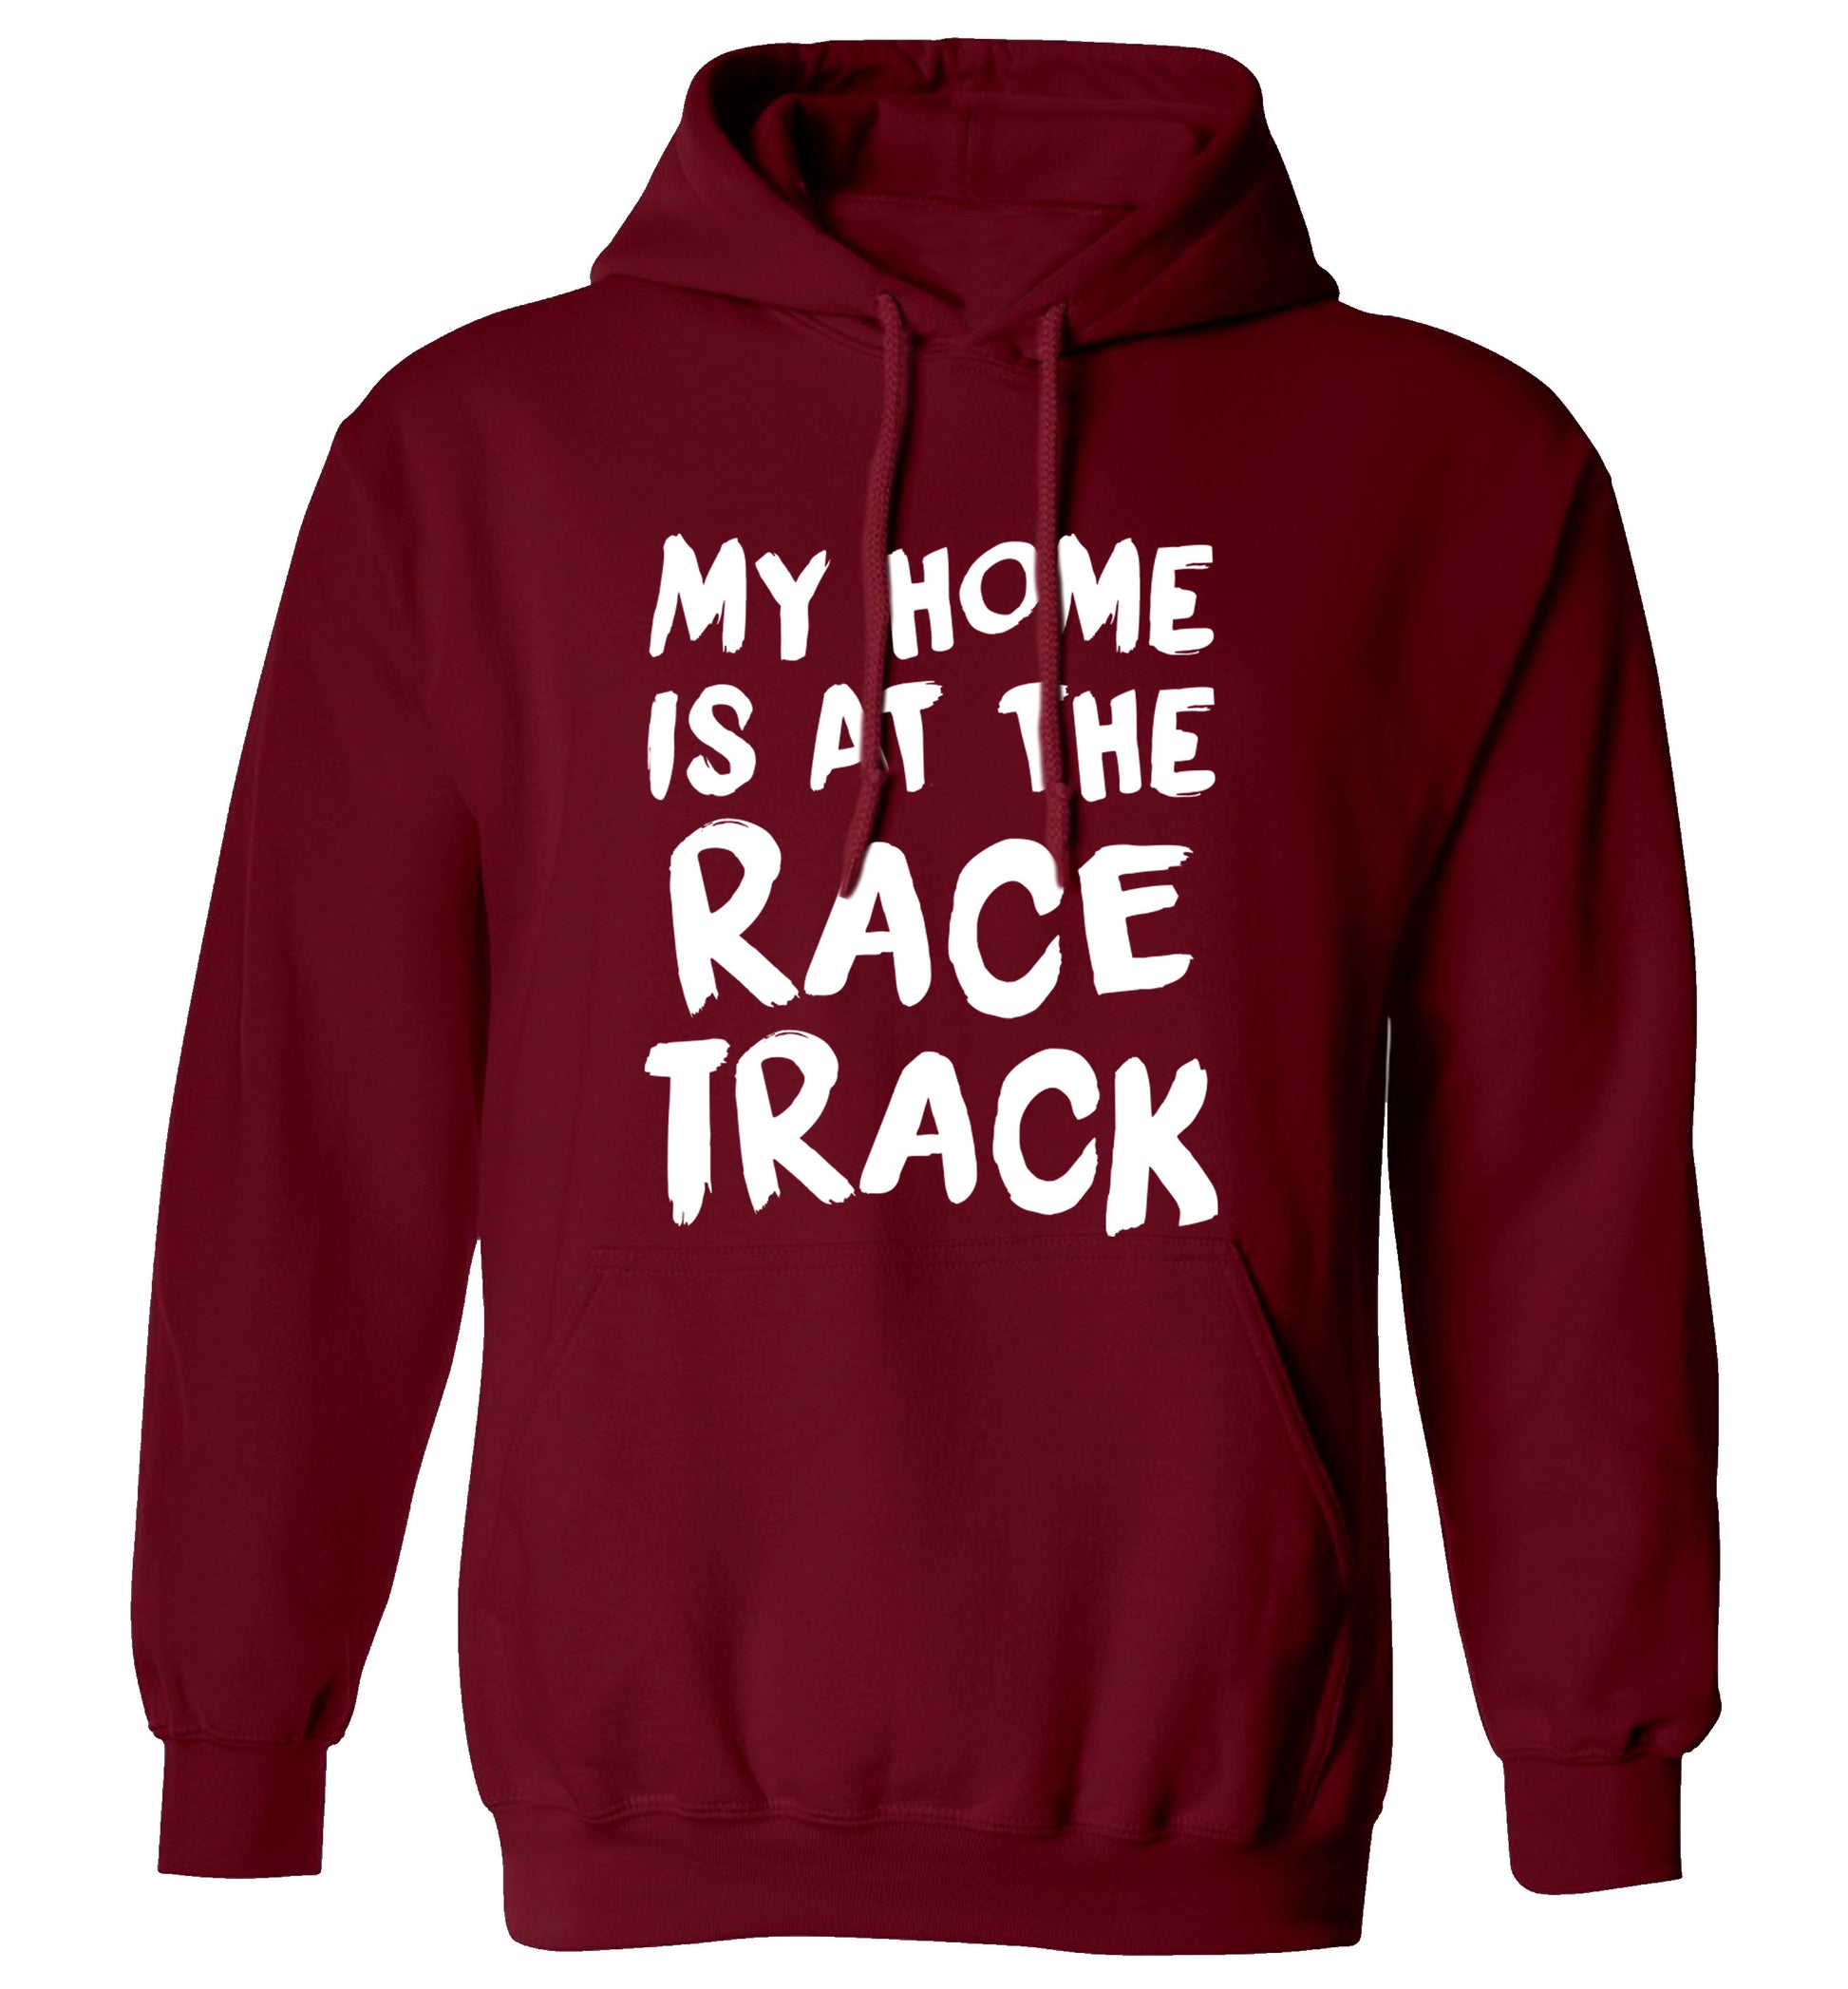 My home is at the race track adults unisex maroon hoodie 2XL